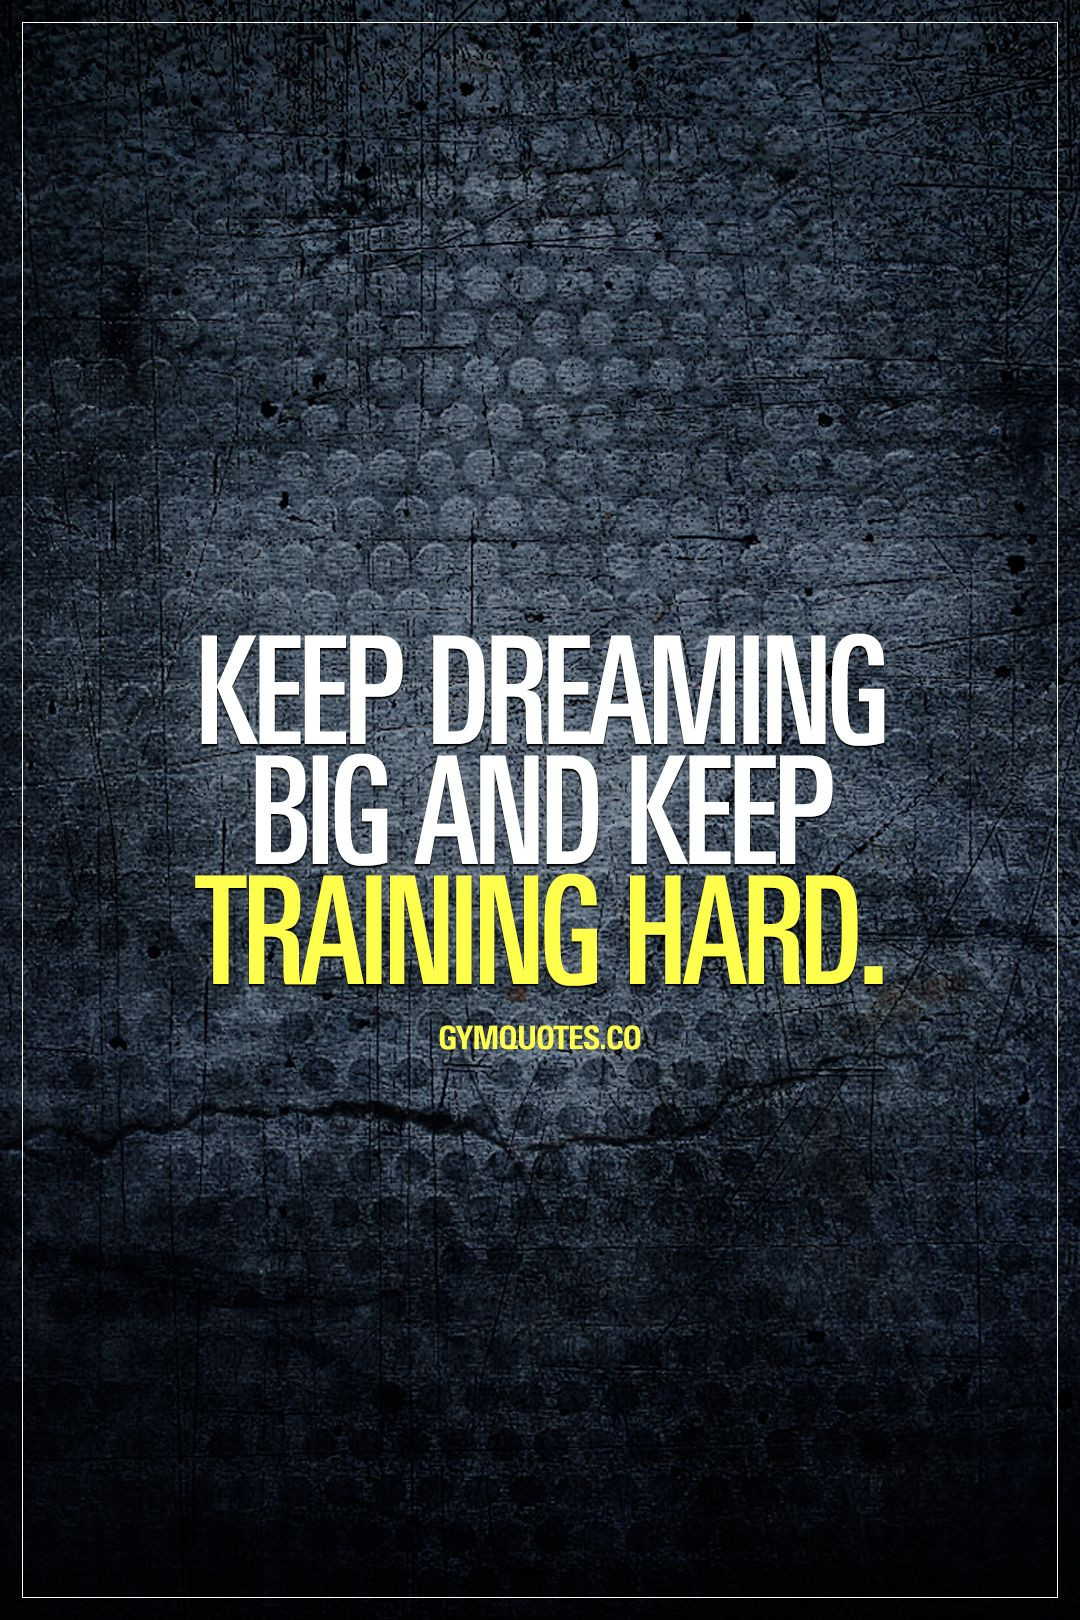 Training Motivation Quotes
 Keep dreaming big and keep training hard Never stop